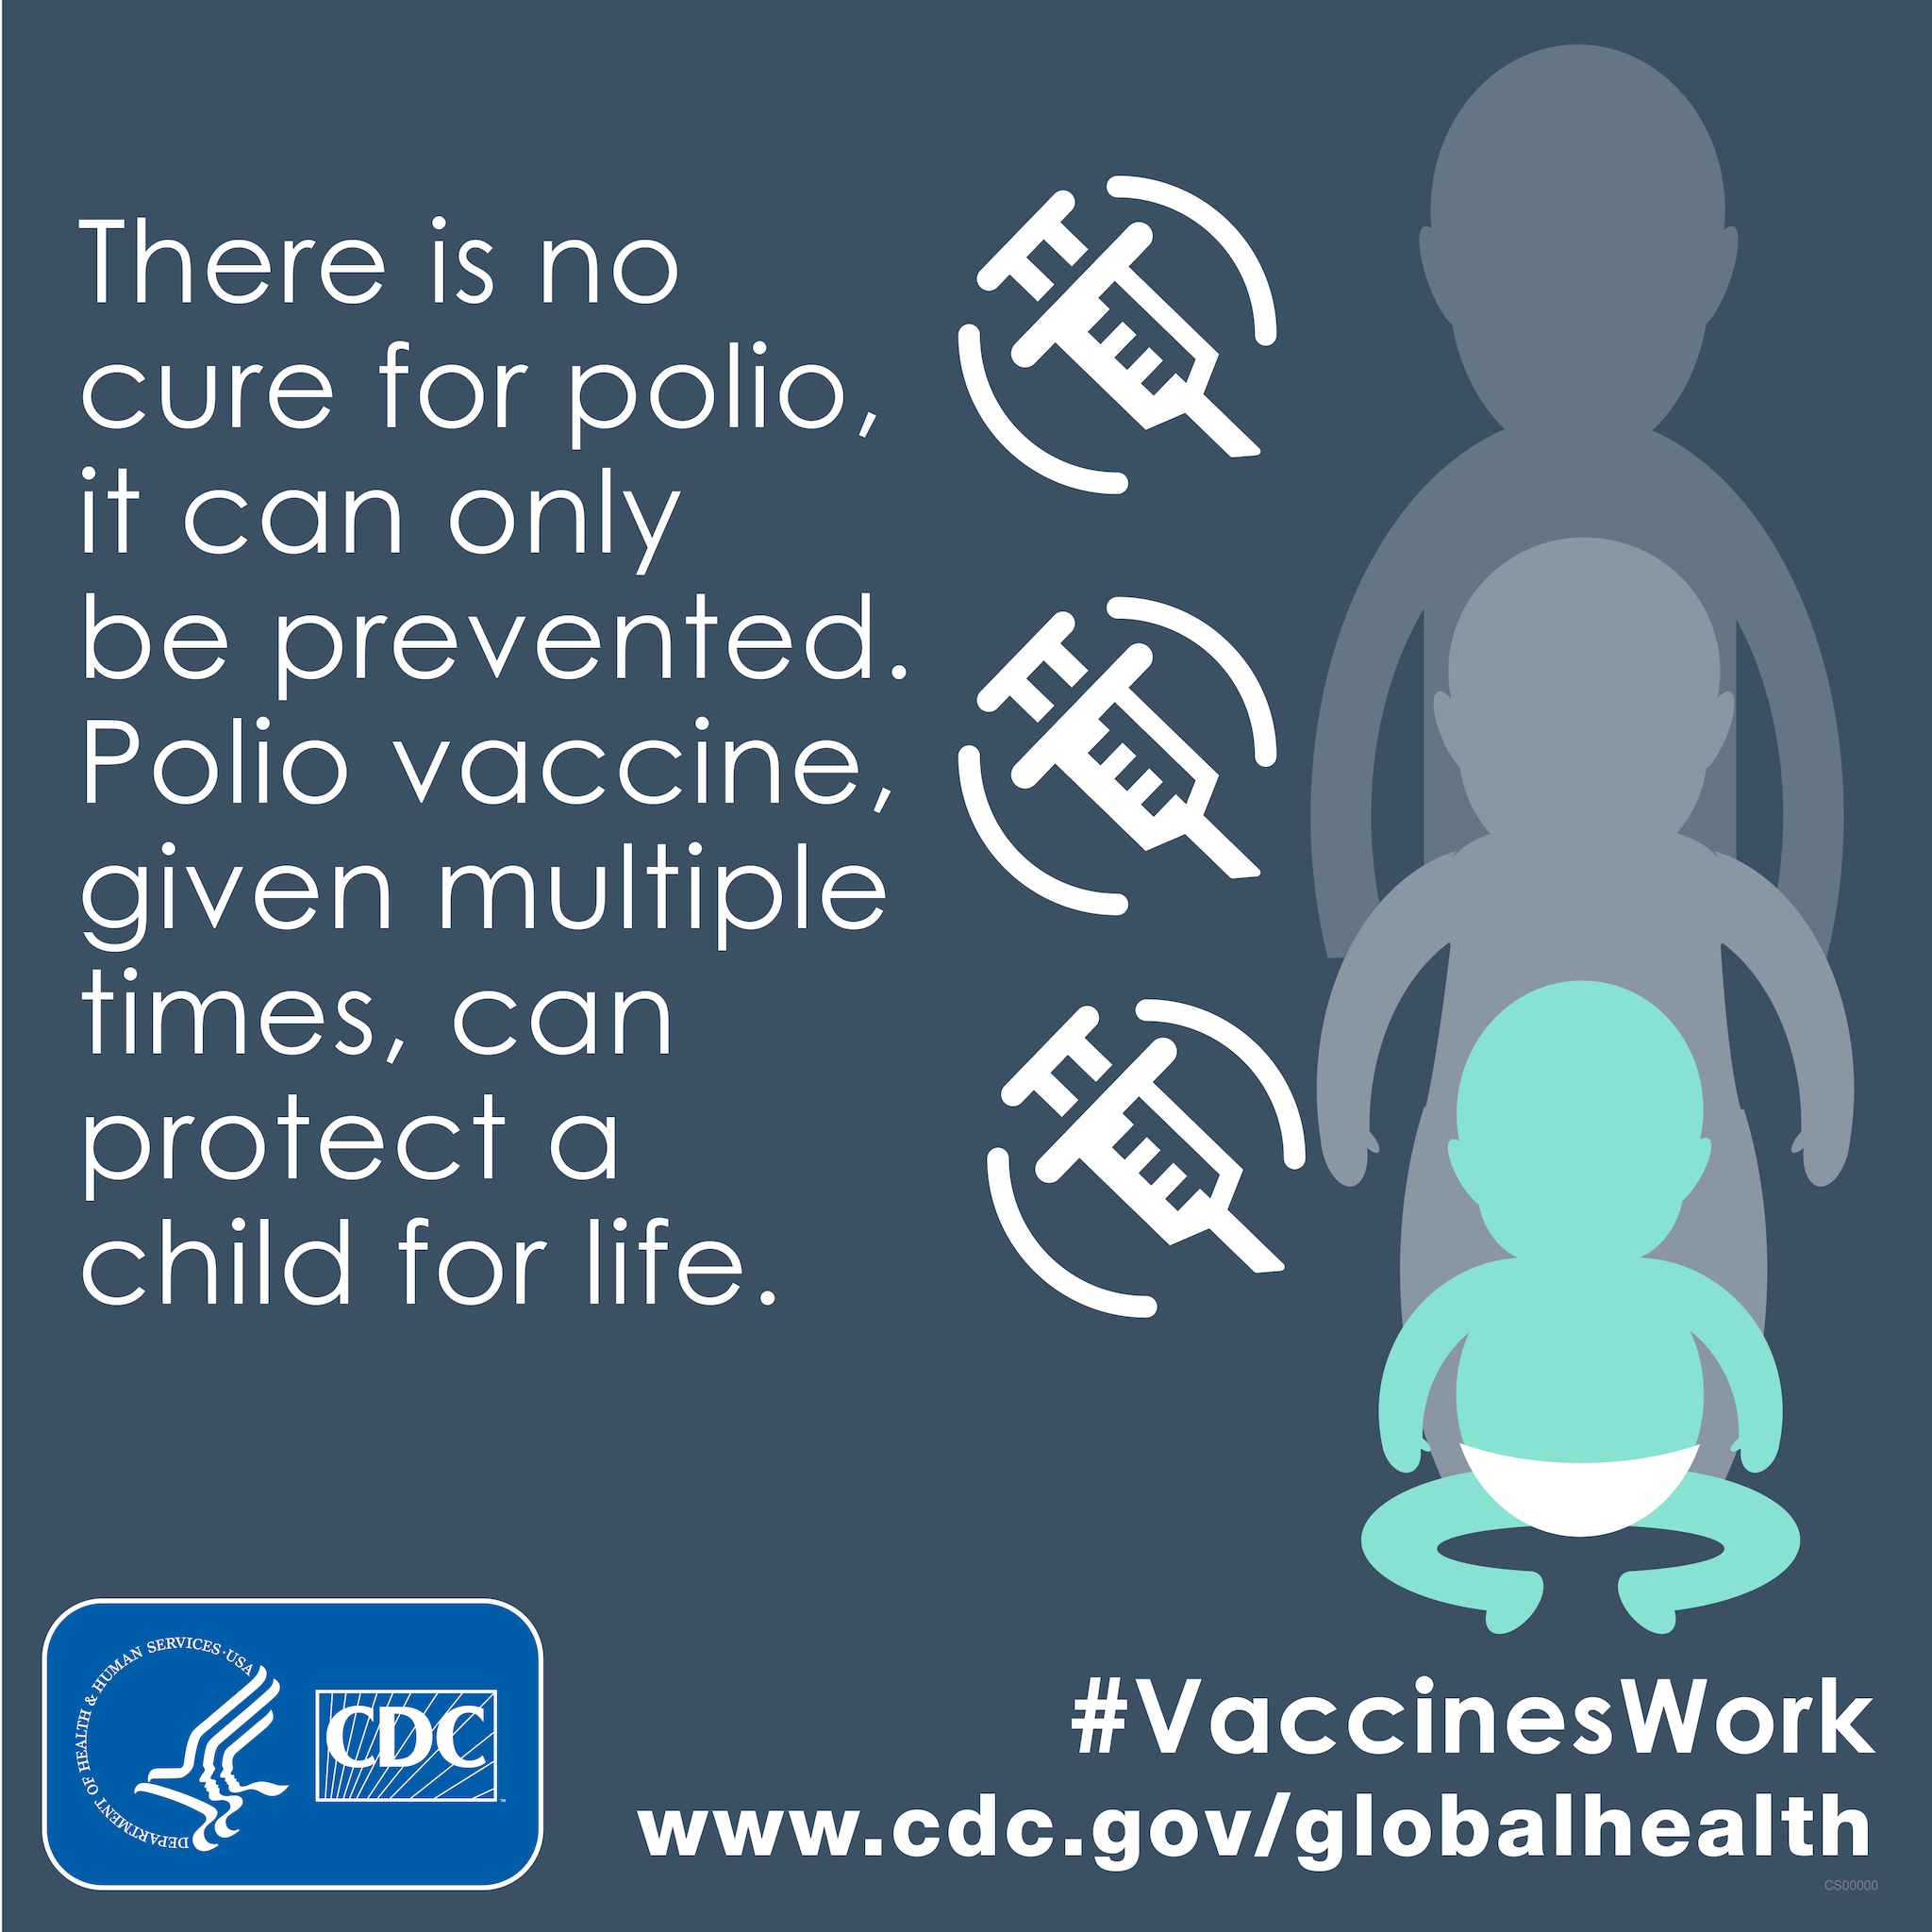 There is no cure for Polio, It can only be prevented. Polio vaccine given multible times, can protect a child for life.